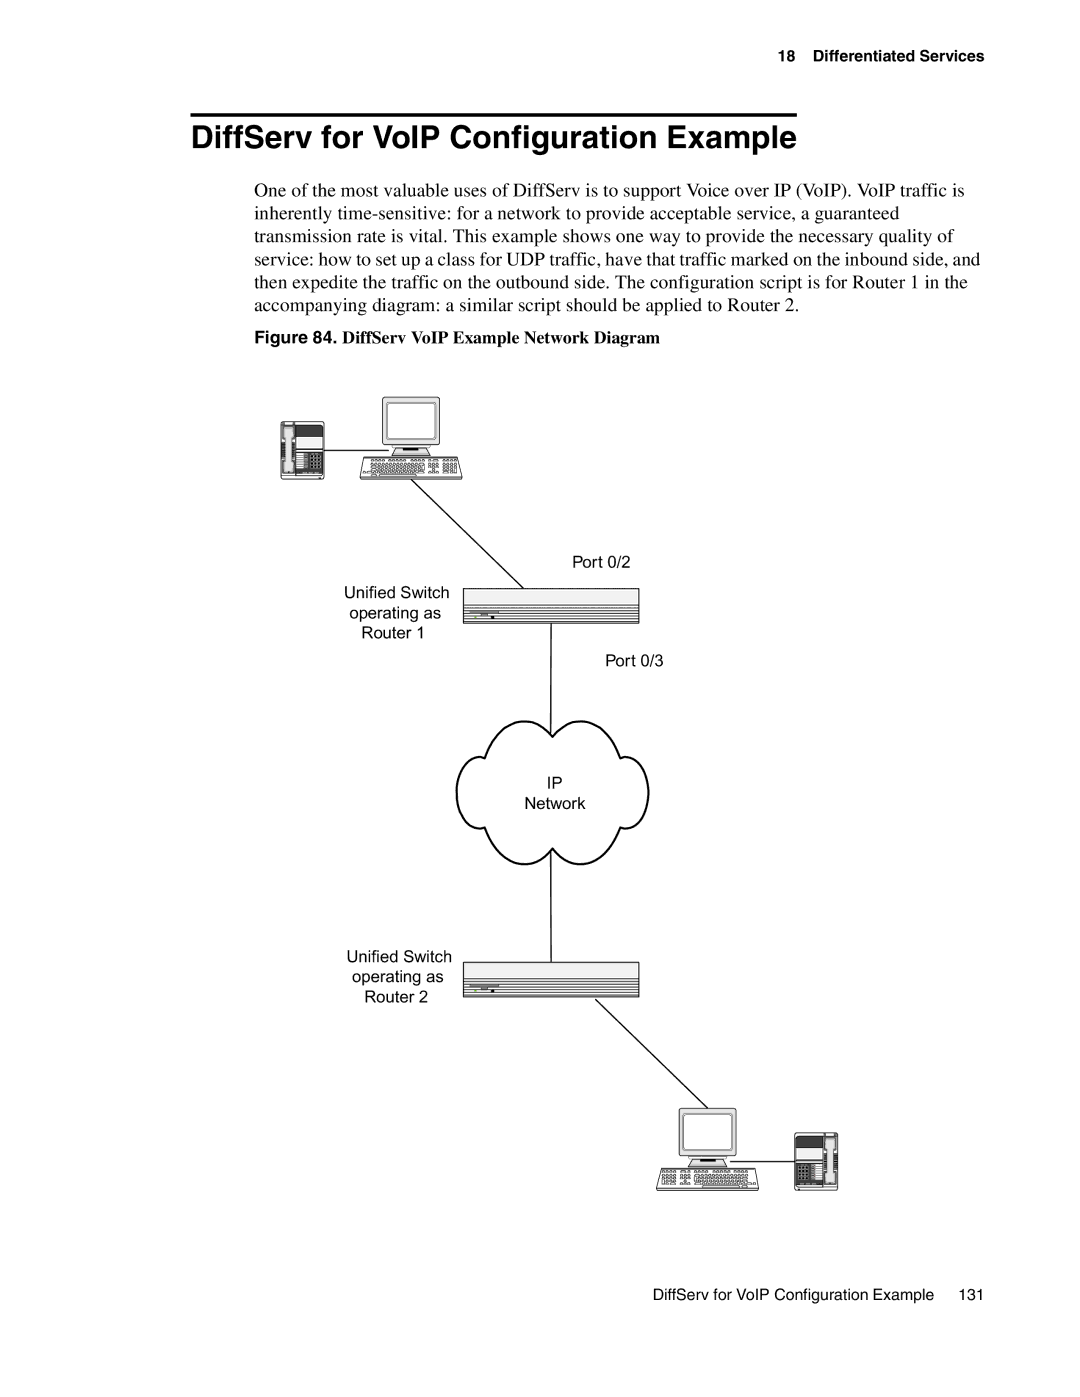 D-Link DWS-3000 manual DiffServ for VoIP Configuration Example, Etwork 